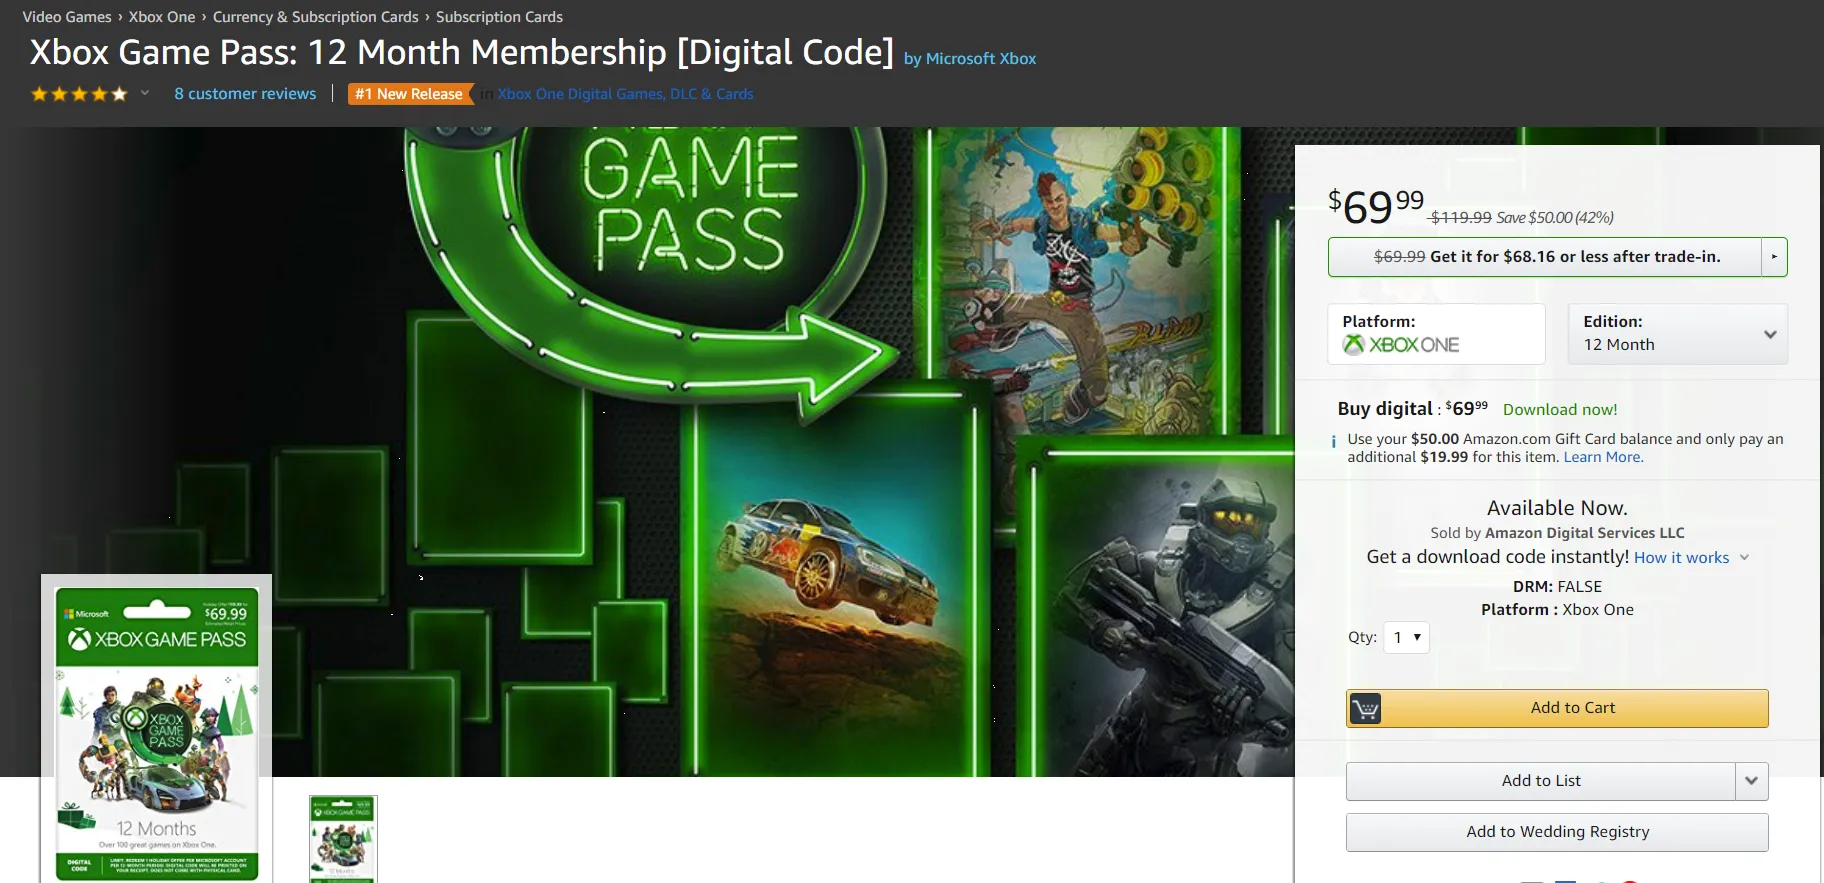 Xbox Game Pass 12 Month Subscription for $69 (50% off)